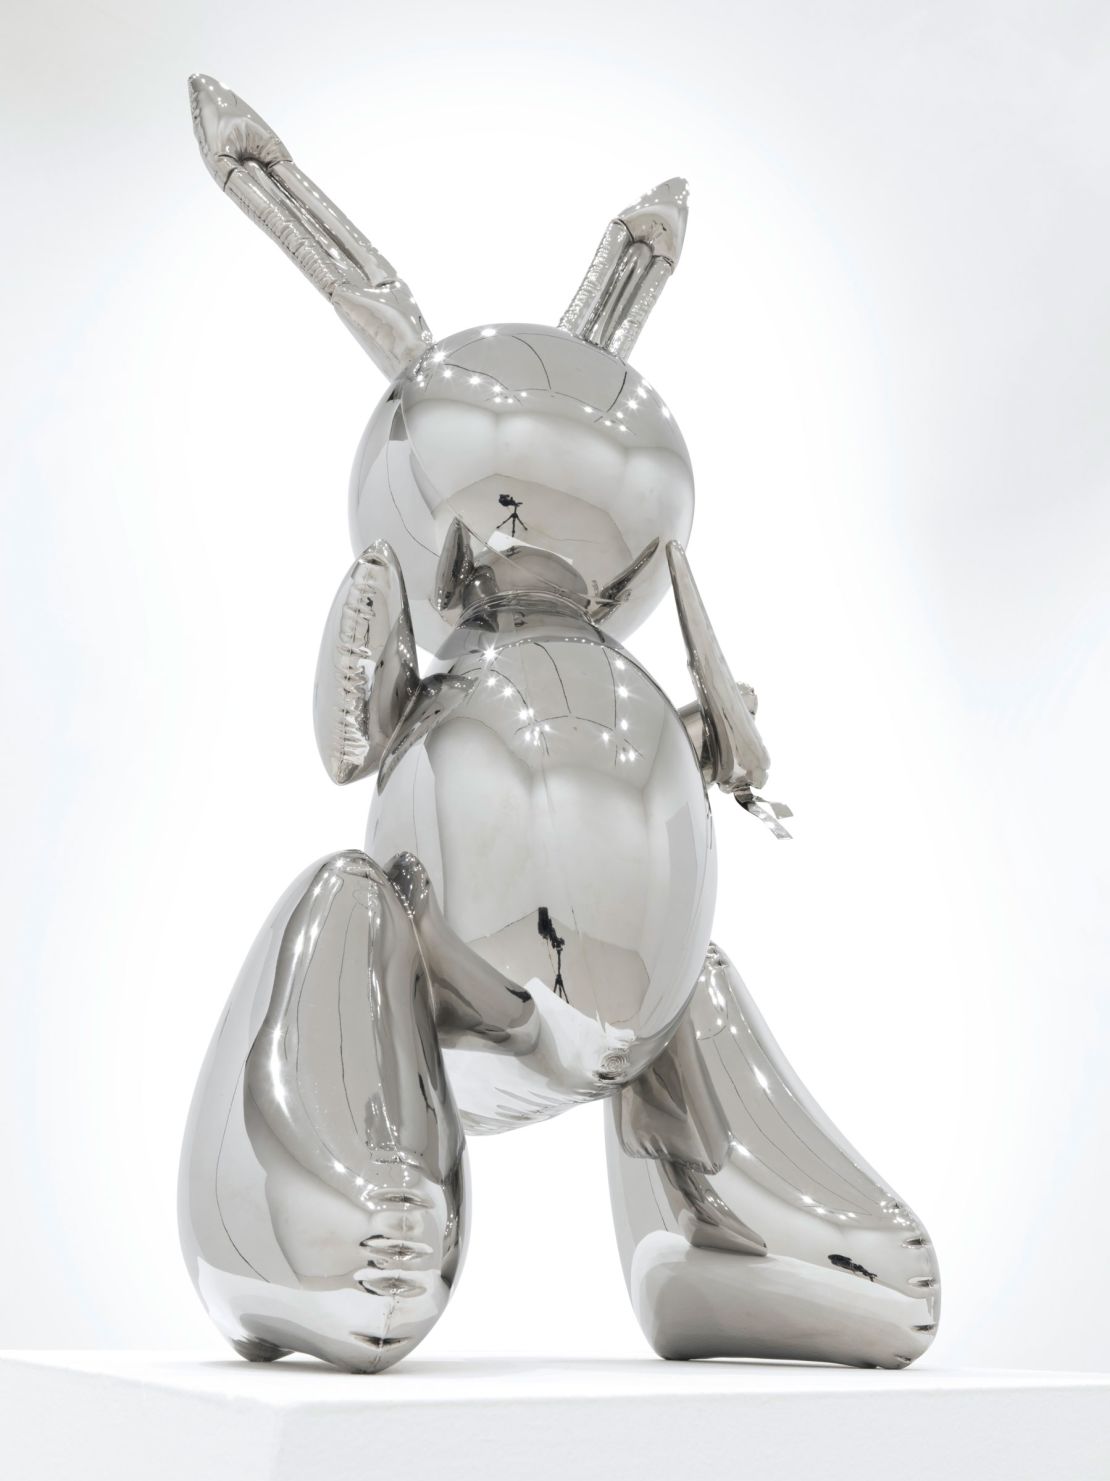 "Rabbit," by Jeff Koons, is now the most expensive artwork by a living artist to ever sell at auction.